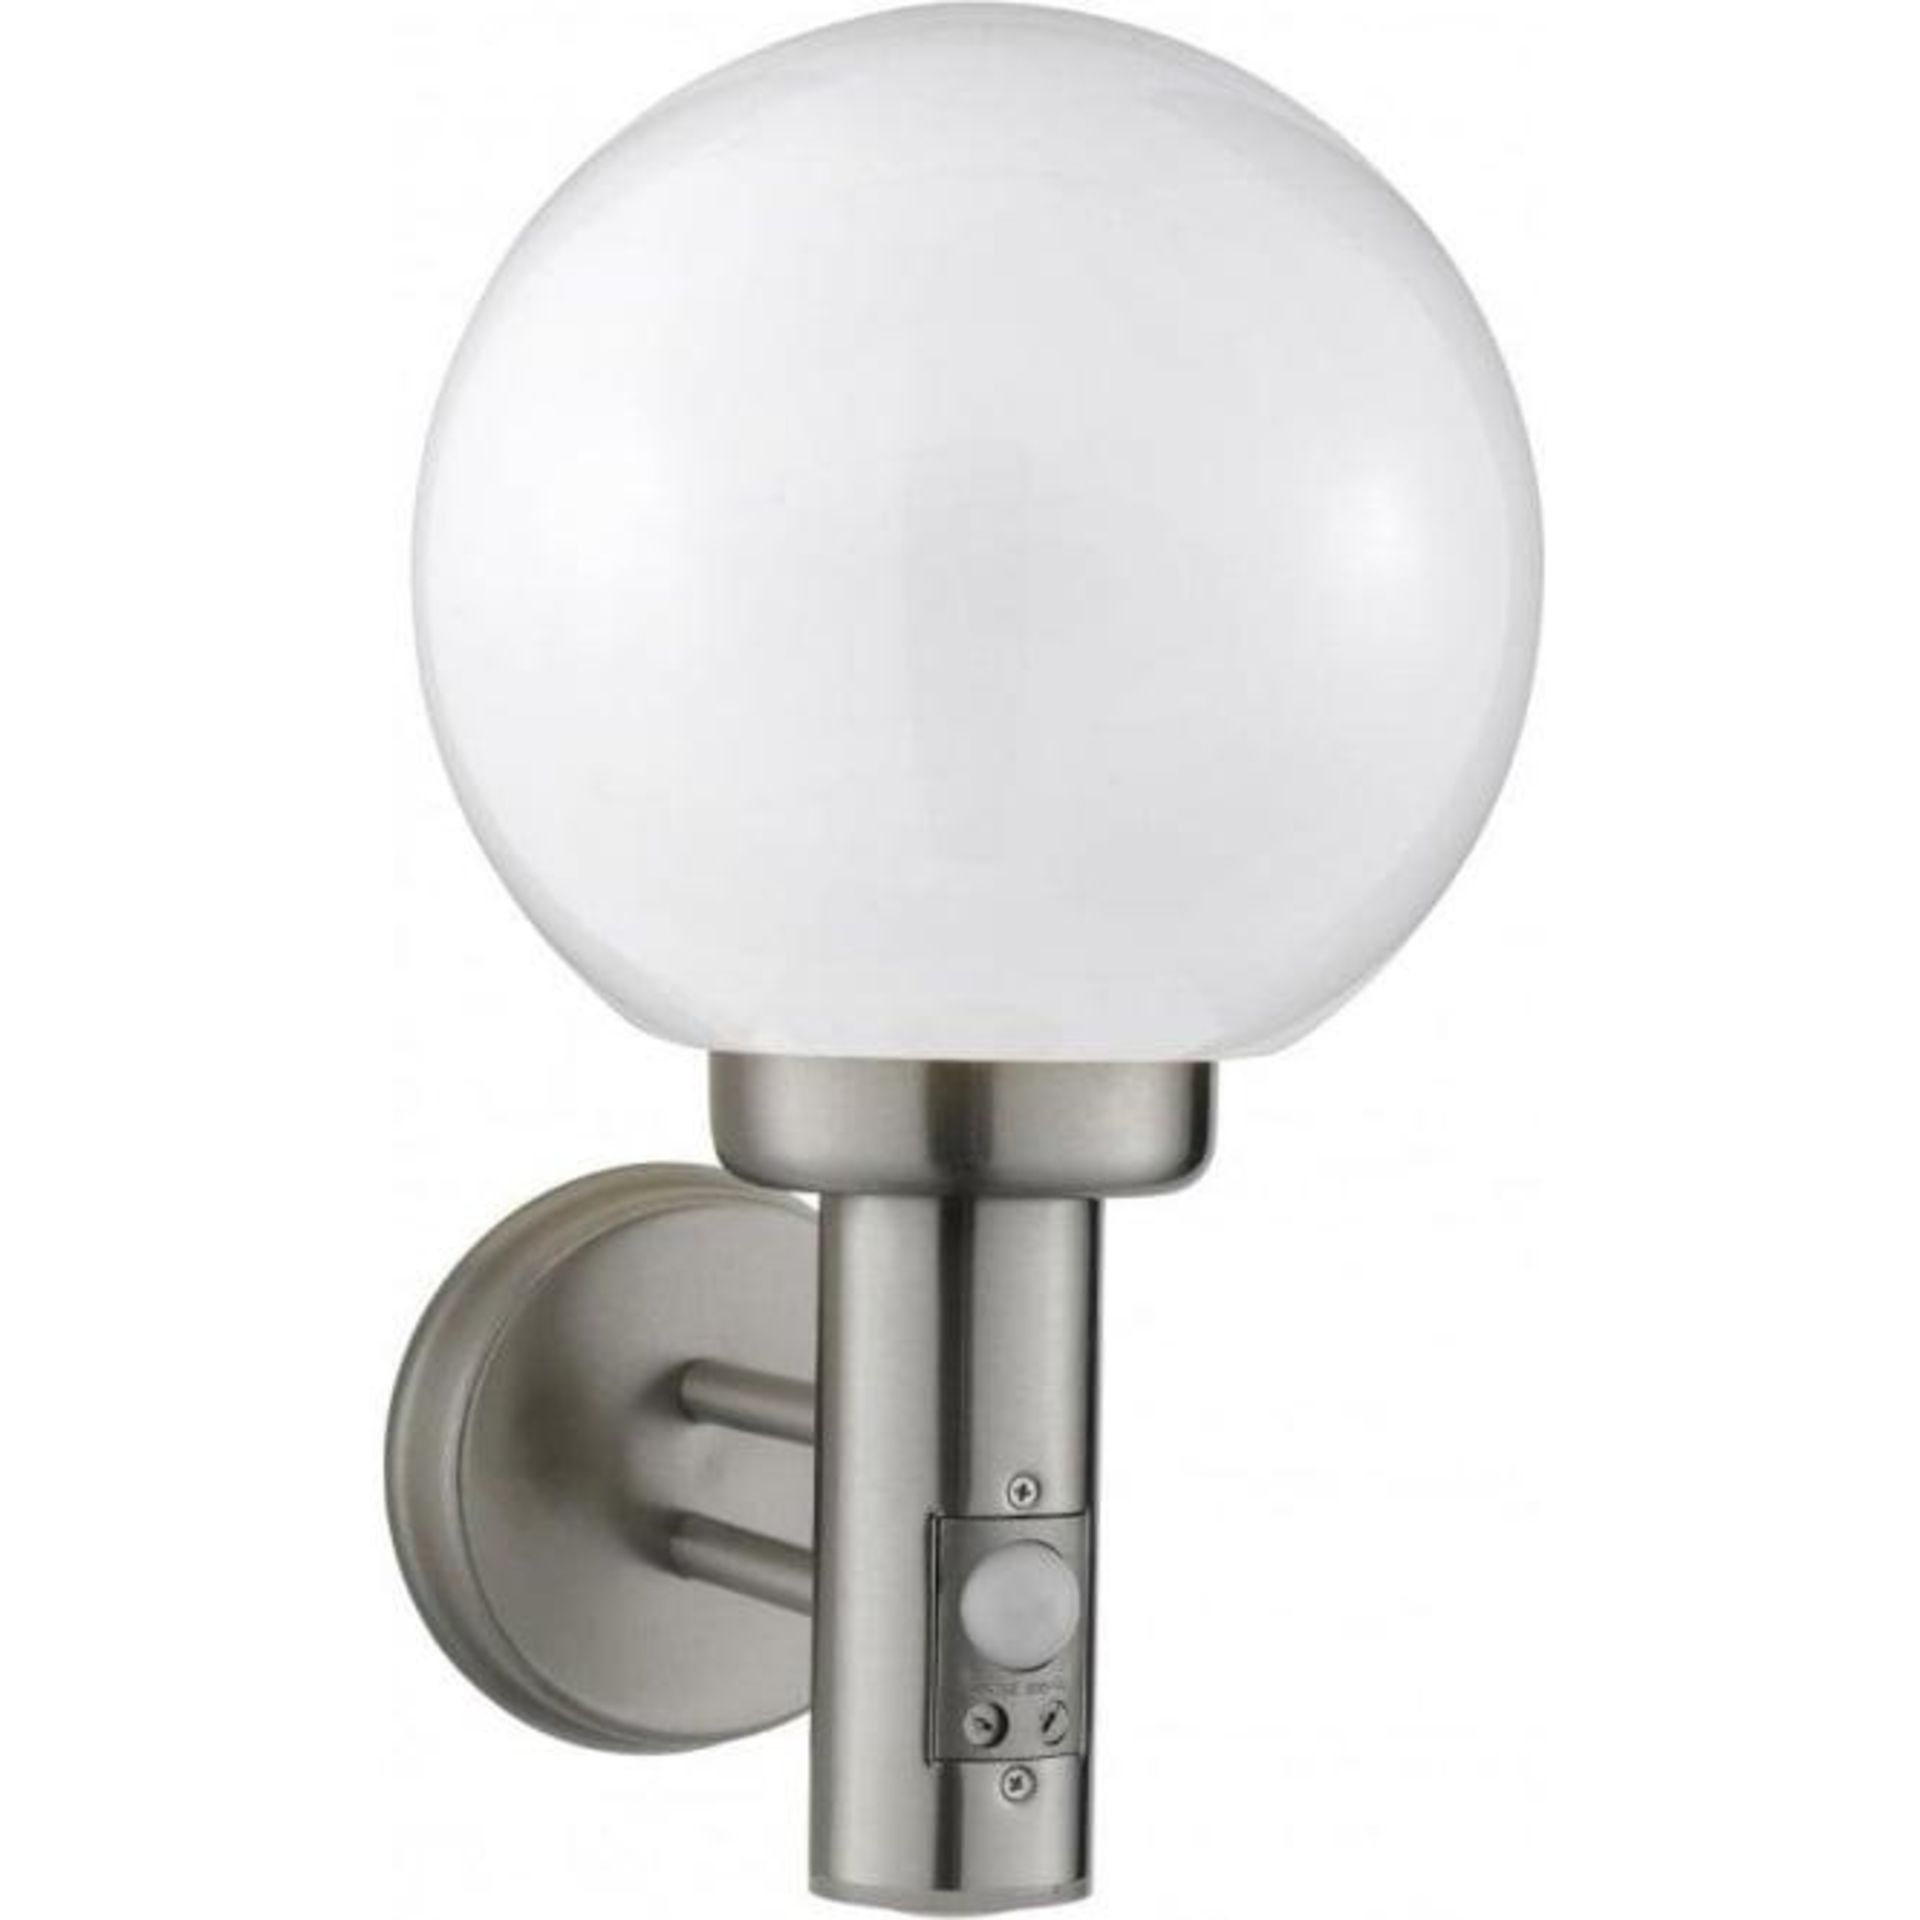 2 x Globe Outdoor Wall Light With PIR Motion Sensor - Stainless Steel With Polycarbonate Shade - IP4 - Image 4 of 5